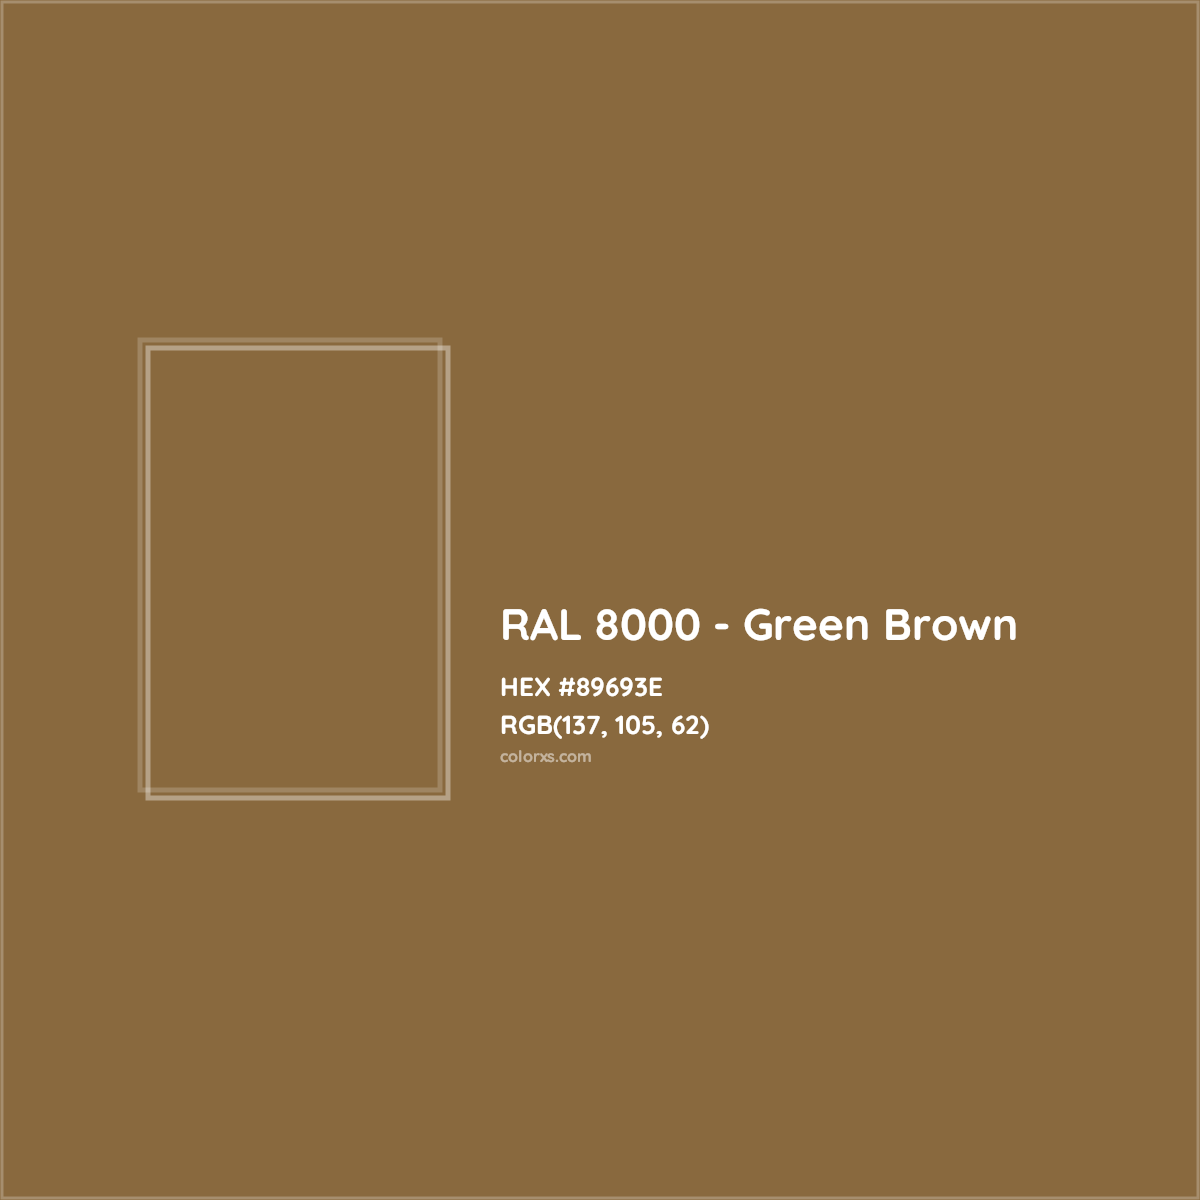 HEX #89693E RAL 8000 - Green Brown CMS RAL Classic - Color Code